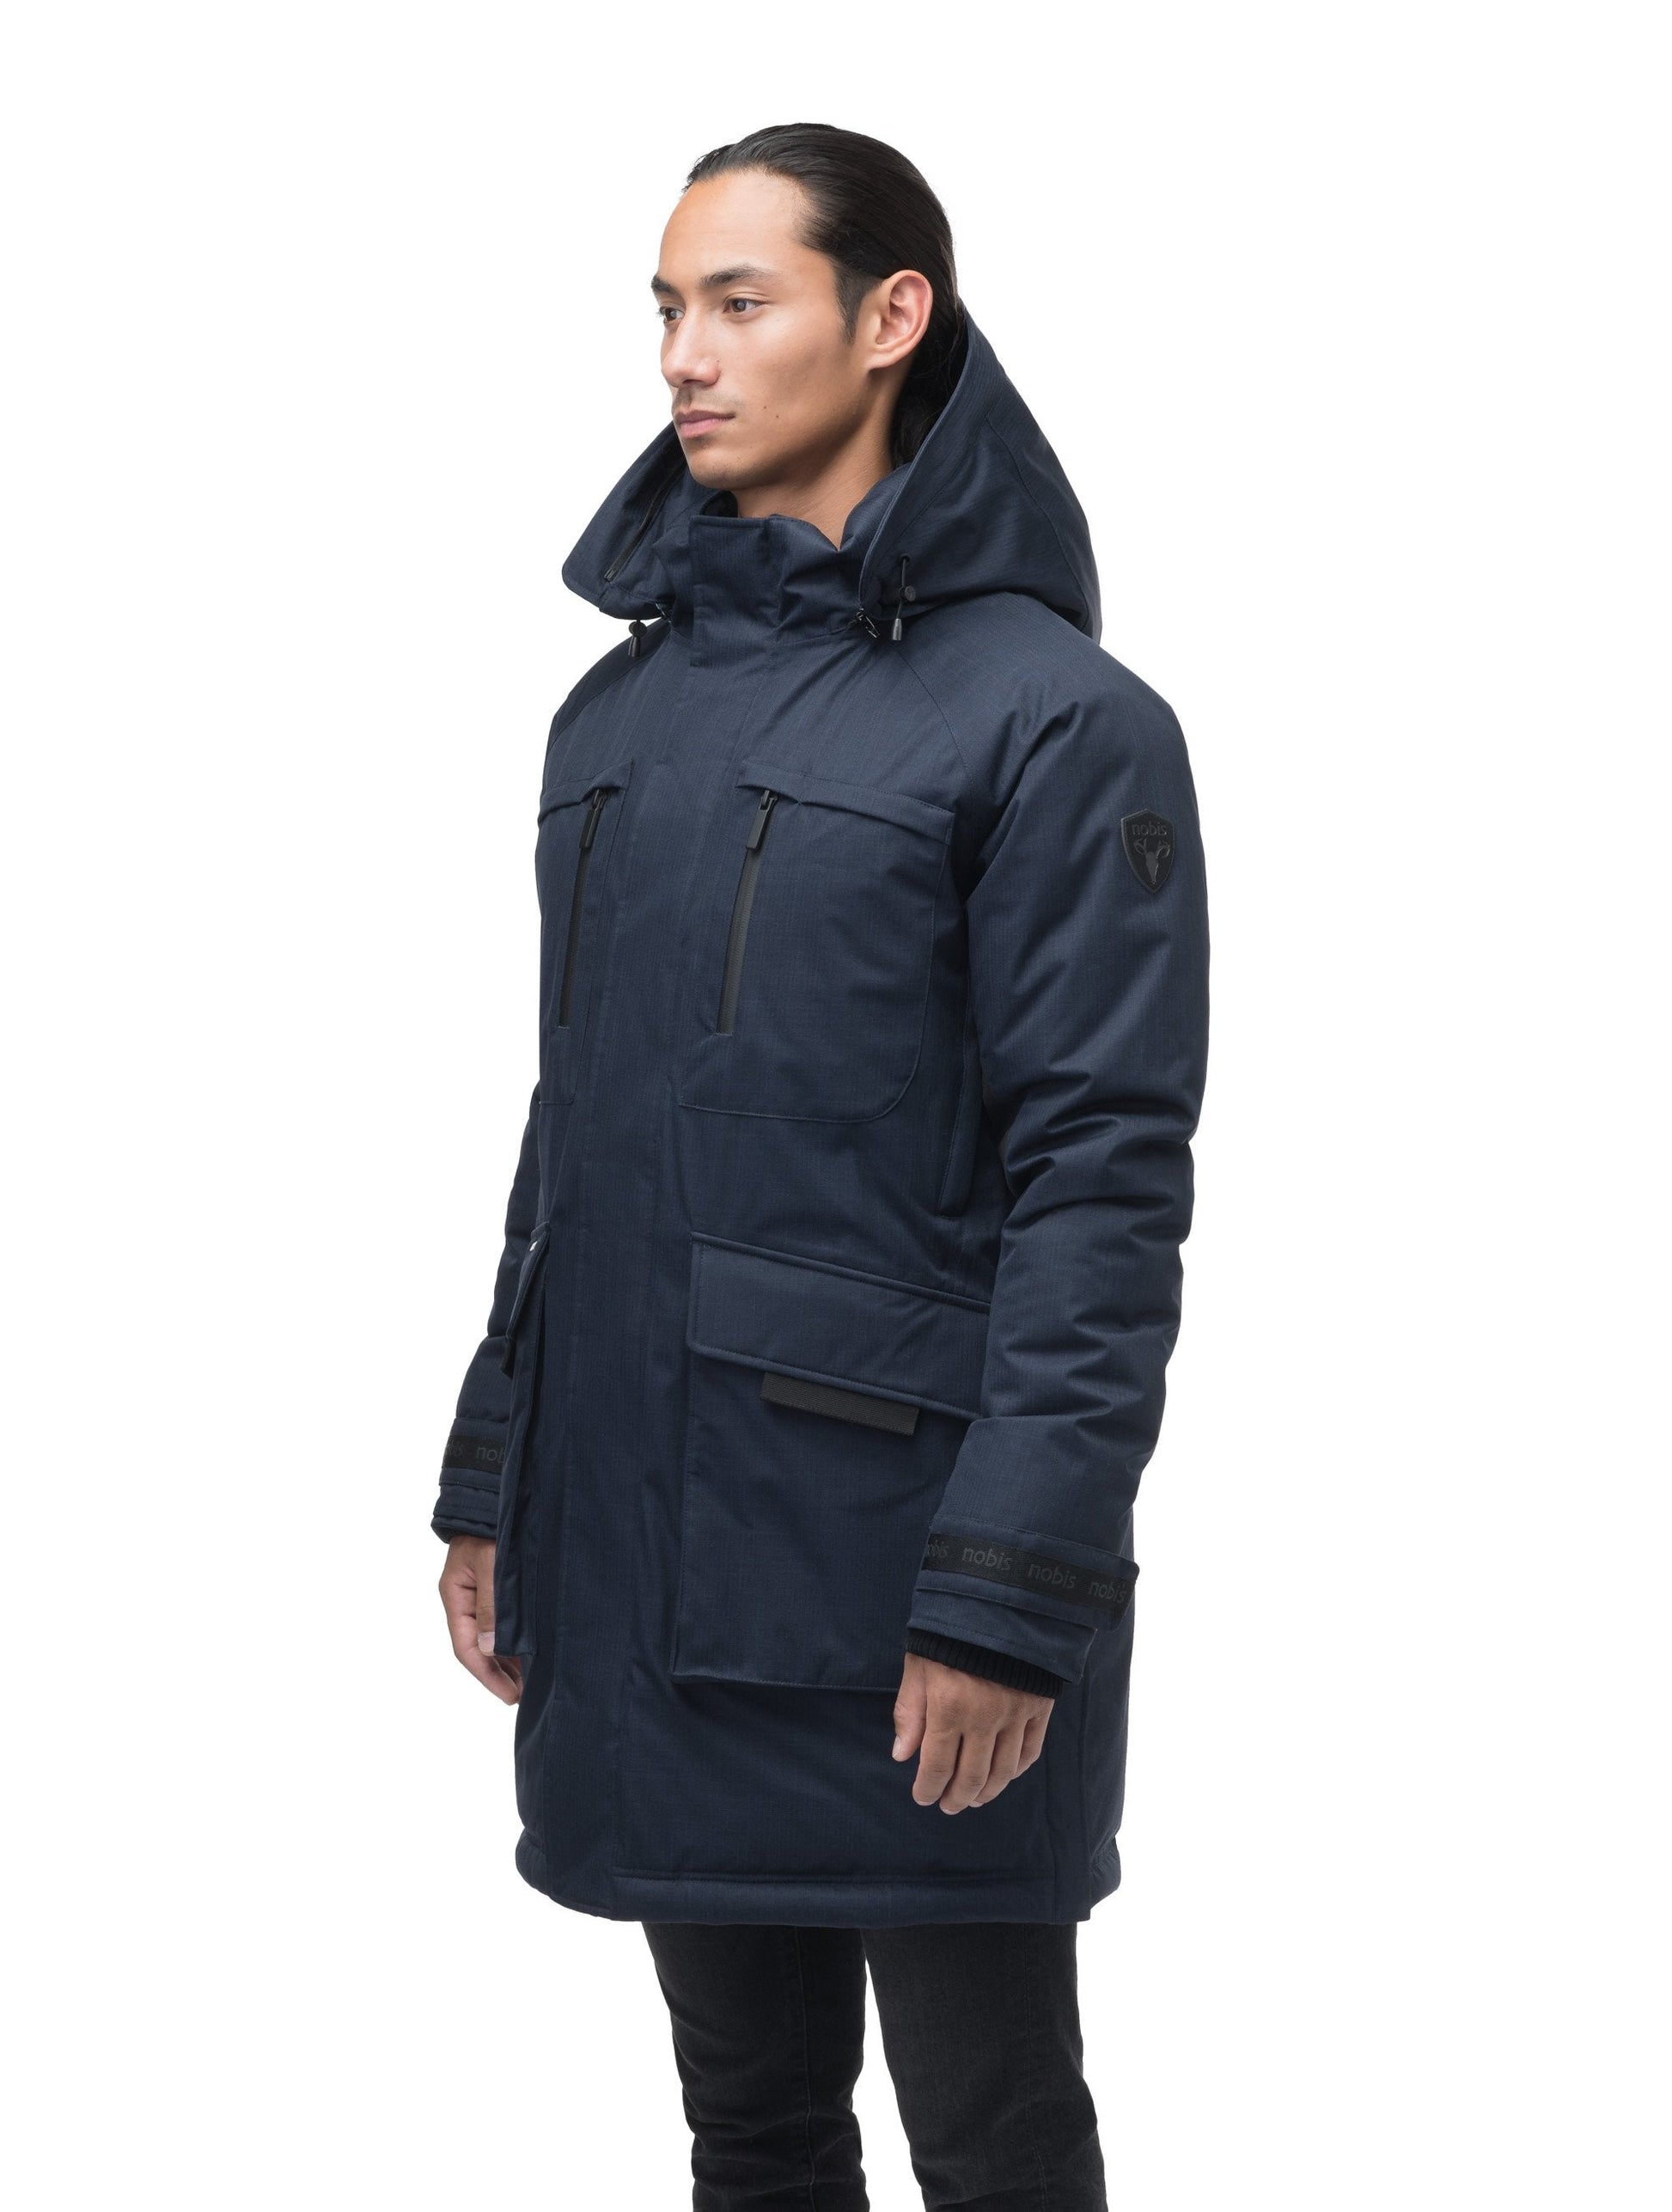 Men's thigh length down-filled parka with removable hood and removable coyote fur trim in Navy